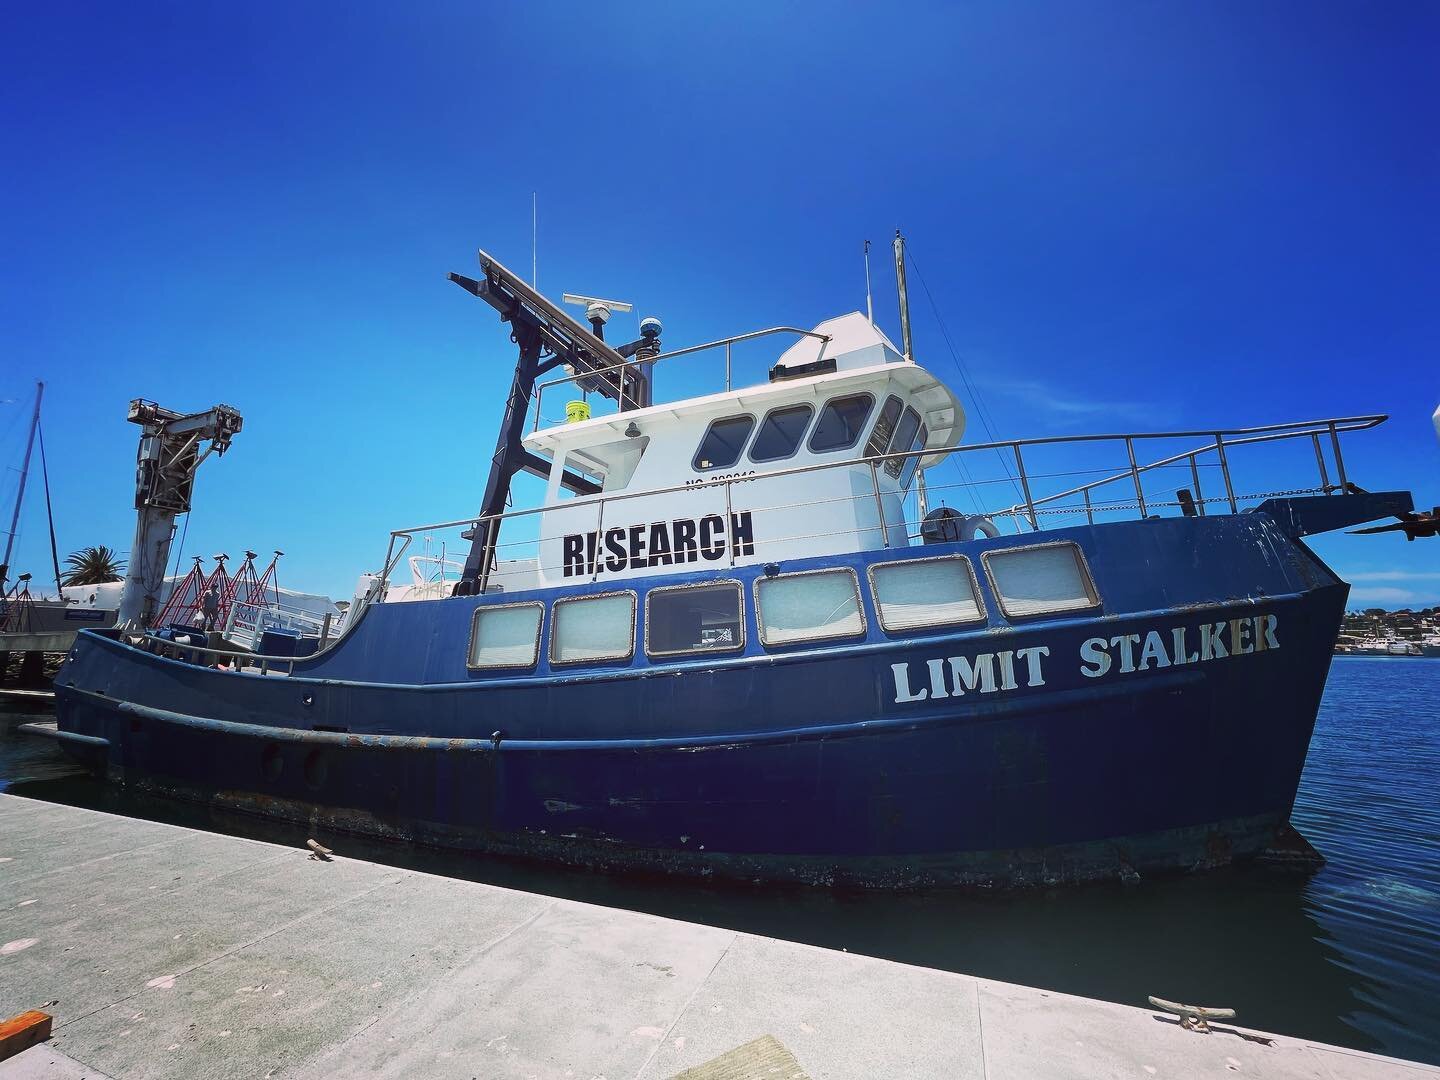 Running sea trials on this single screw private research vessel &ldquo;Limit Stalker&rdquo; today. Interesting vessel that started as an old fishing trawler up in Alaska. It&rsquo;s original set up was your typical old fishing trawlers busy deck with